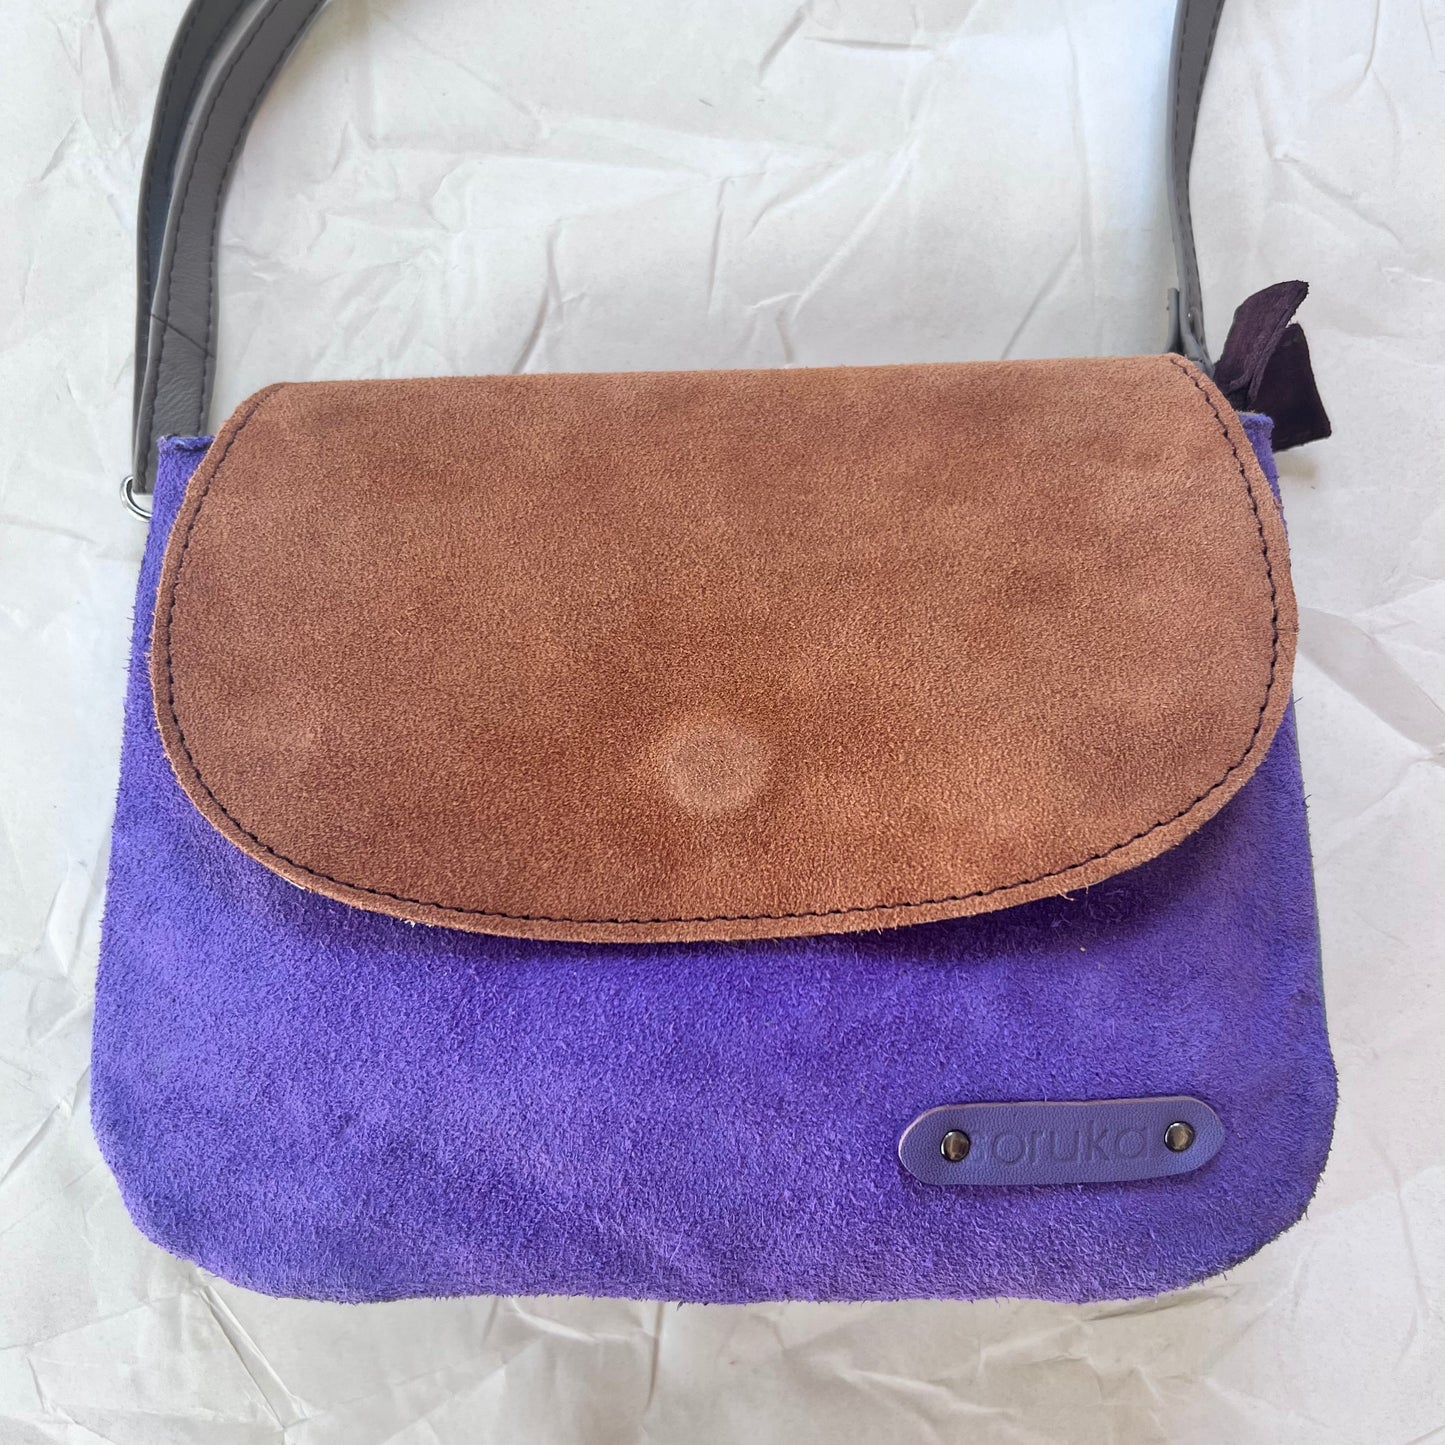 other side of leo purse with purple body and brown flap.